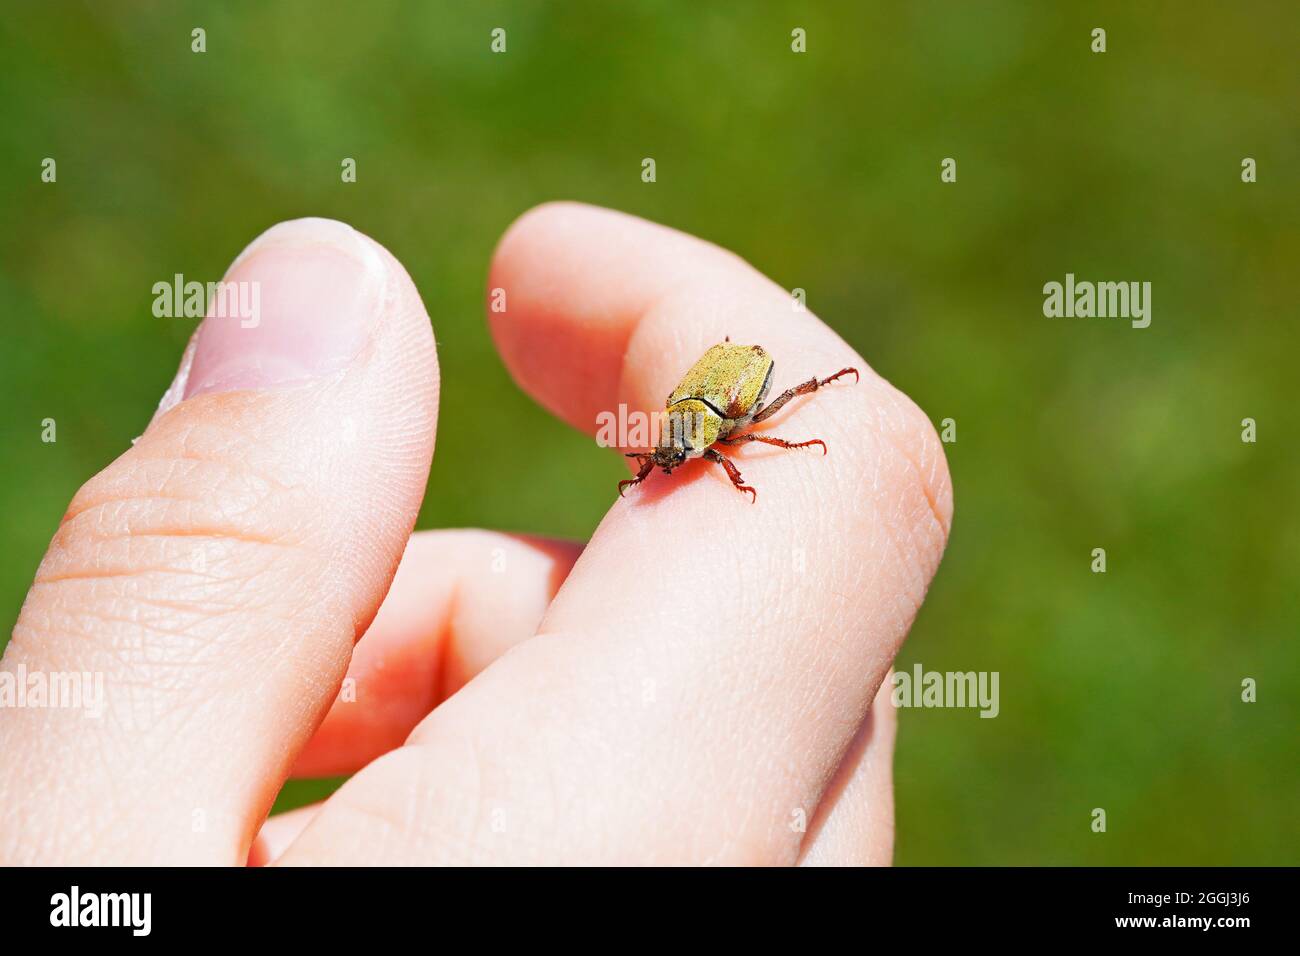 Gold dust tree beetle on hand. Insect close up. Hoplia argentea. Stock Photo